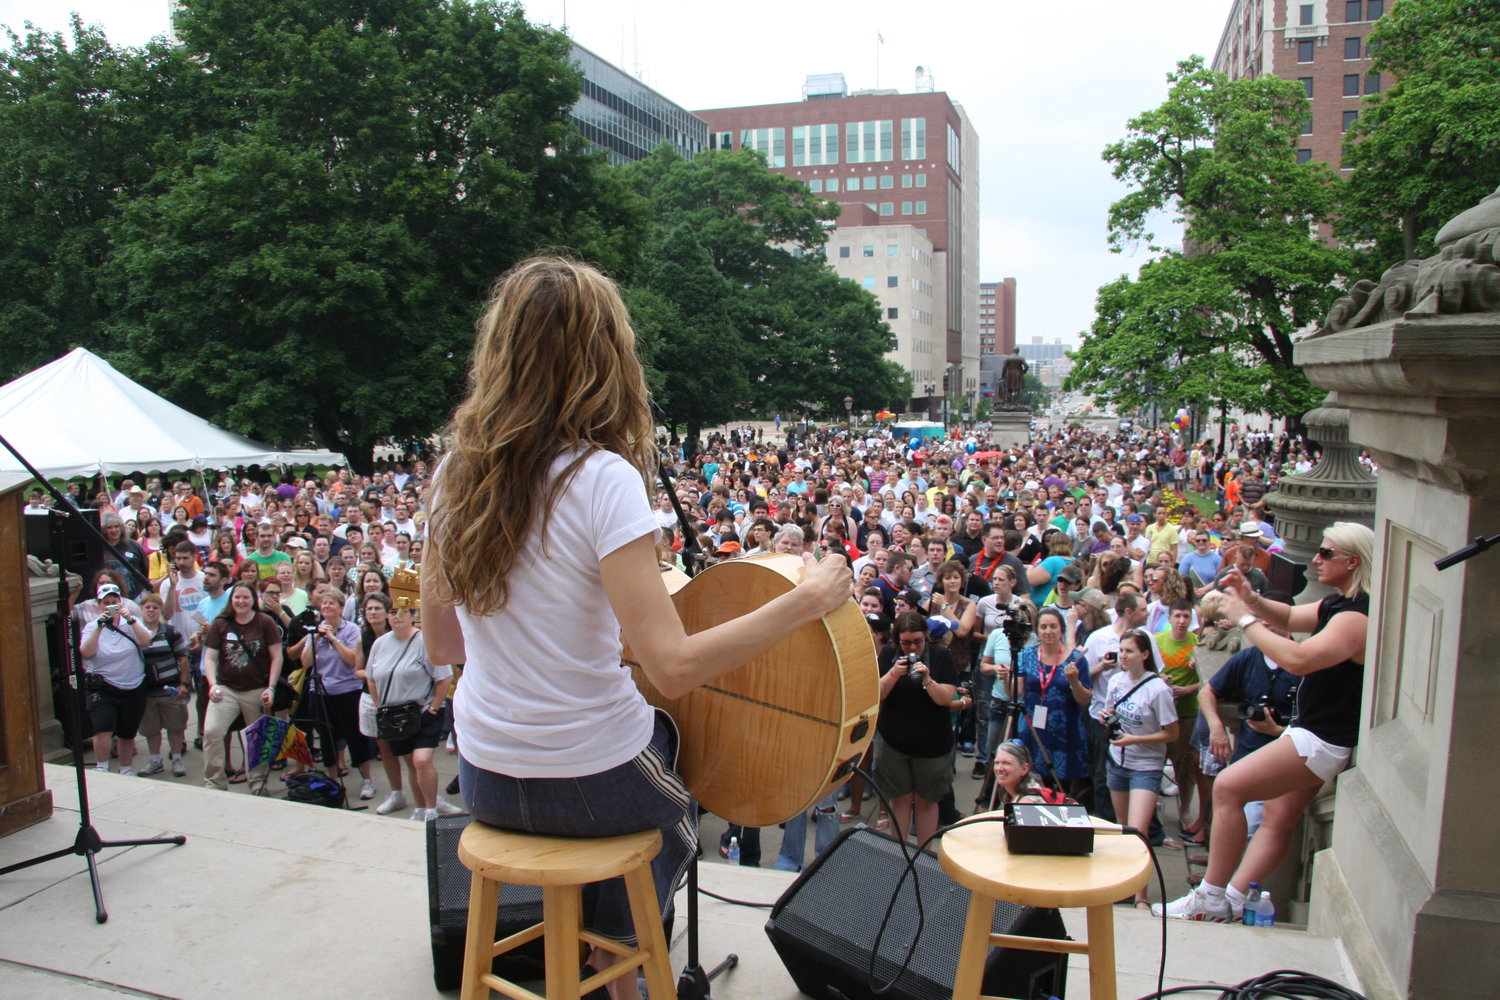 “Large crowd assembles at the Capitol for a rally and speech from Grand Marshal Shelly Wright, the first Country and Western singer to publicly come out. 2010.”